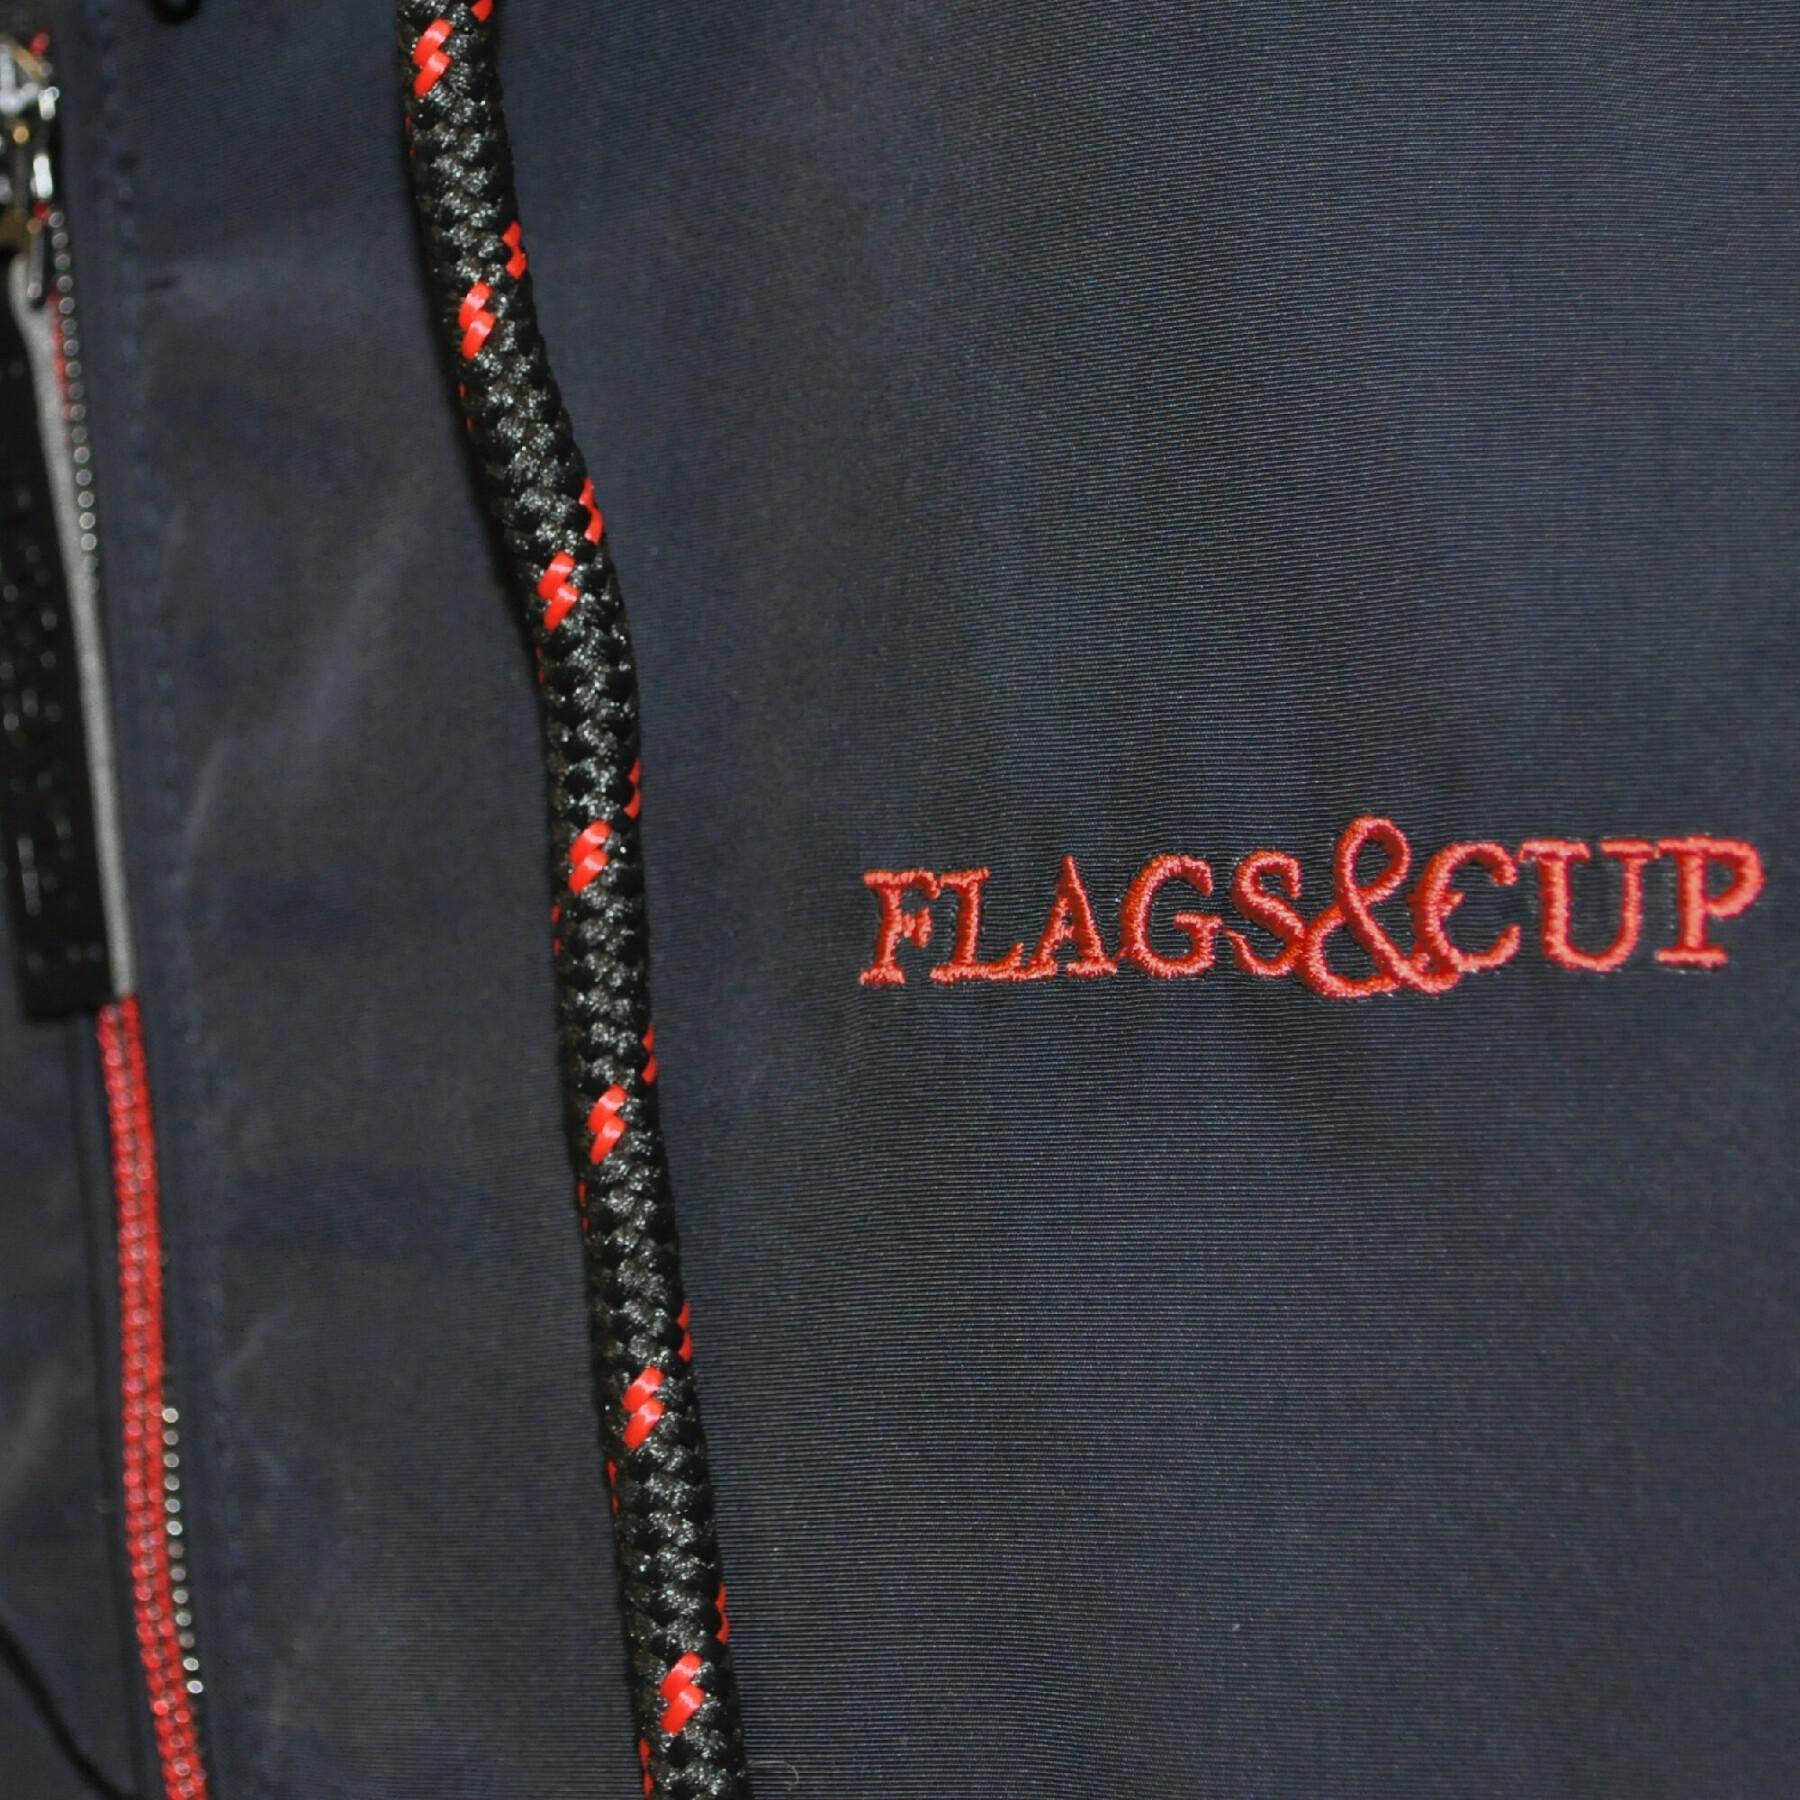 Jacket Flags&Cup Ambo